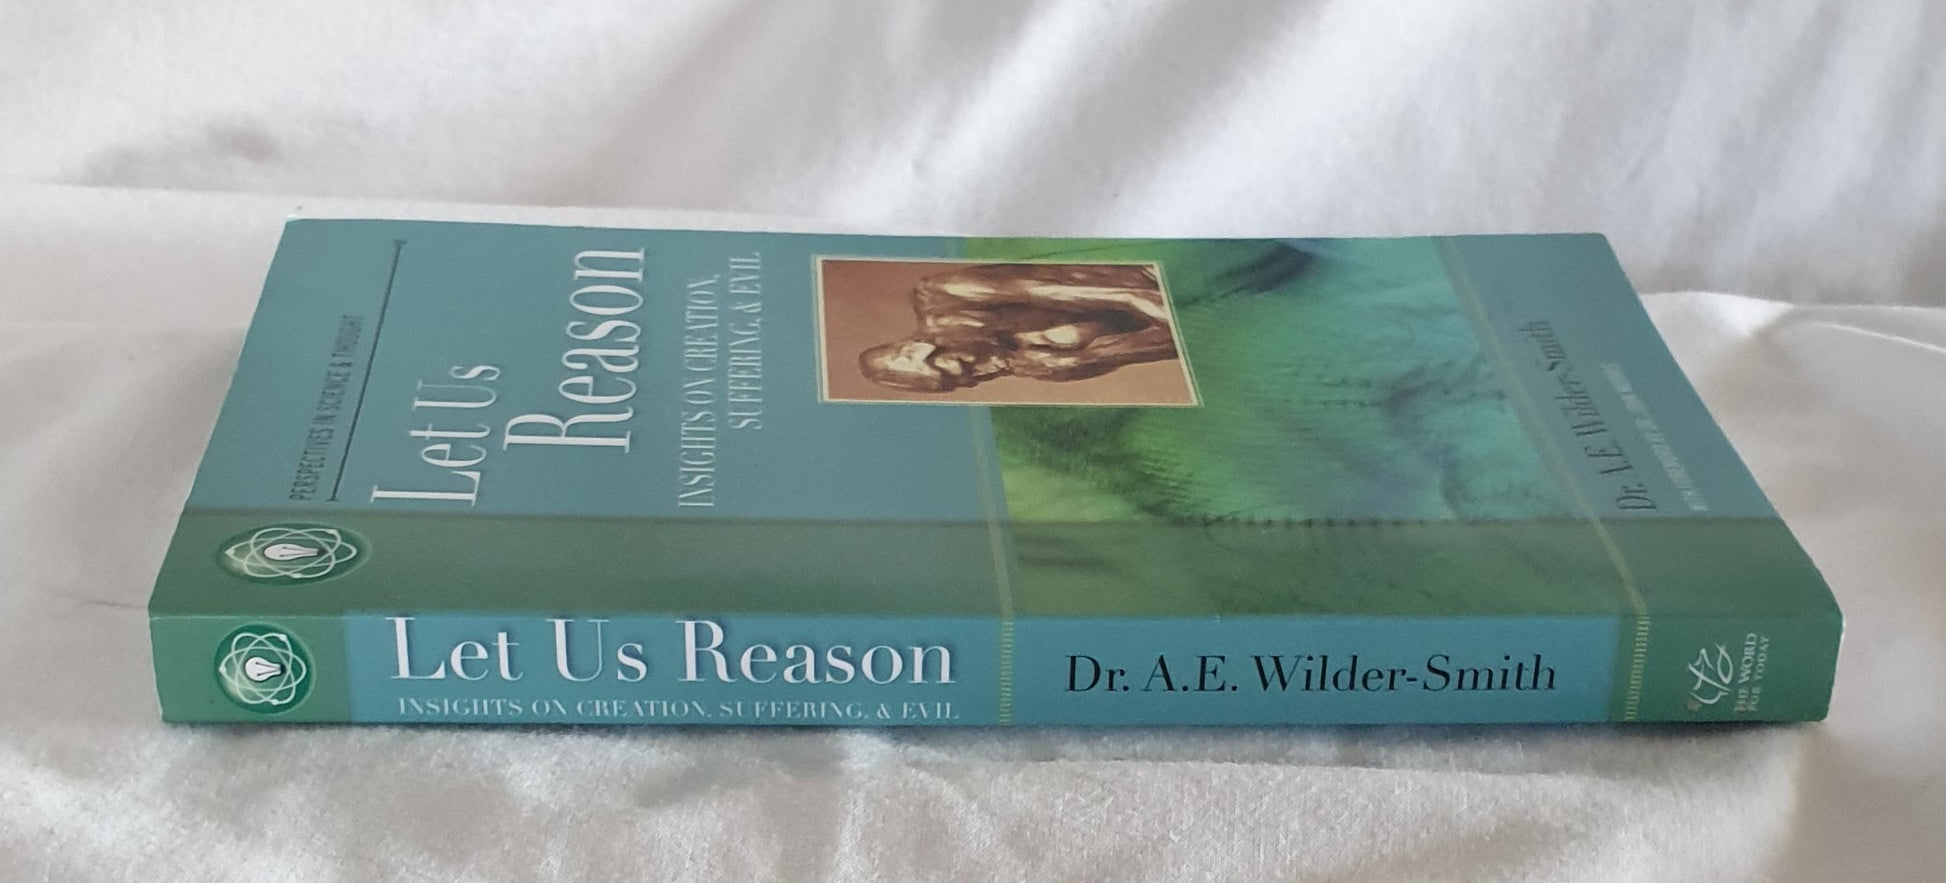 Let Us Reason: A Collection of Short Classics  Insights on Creation, Suffering, & Evil  by Dr A. E. Wilder-Smith